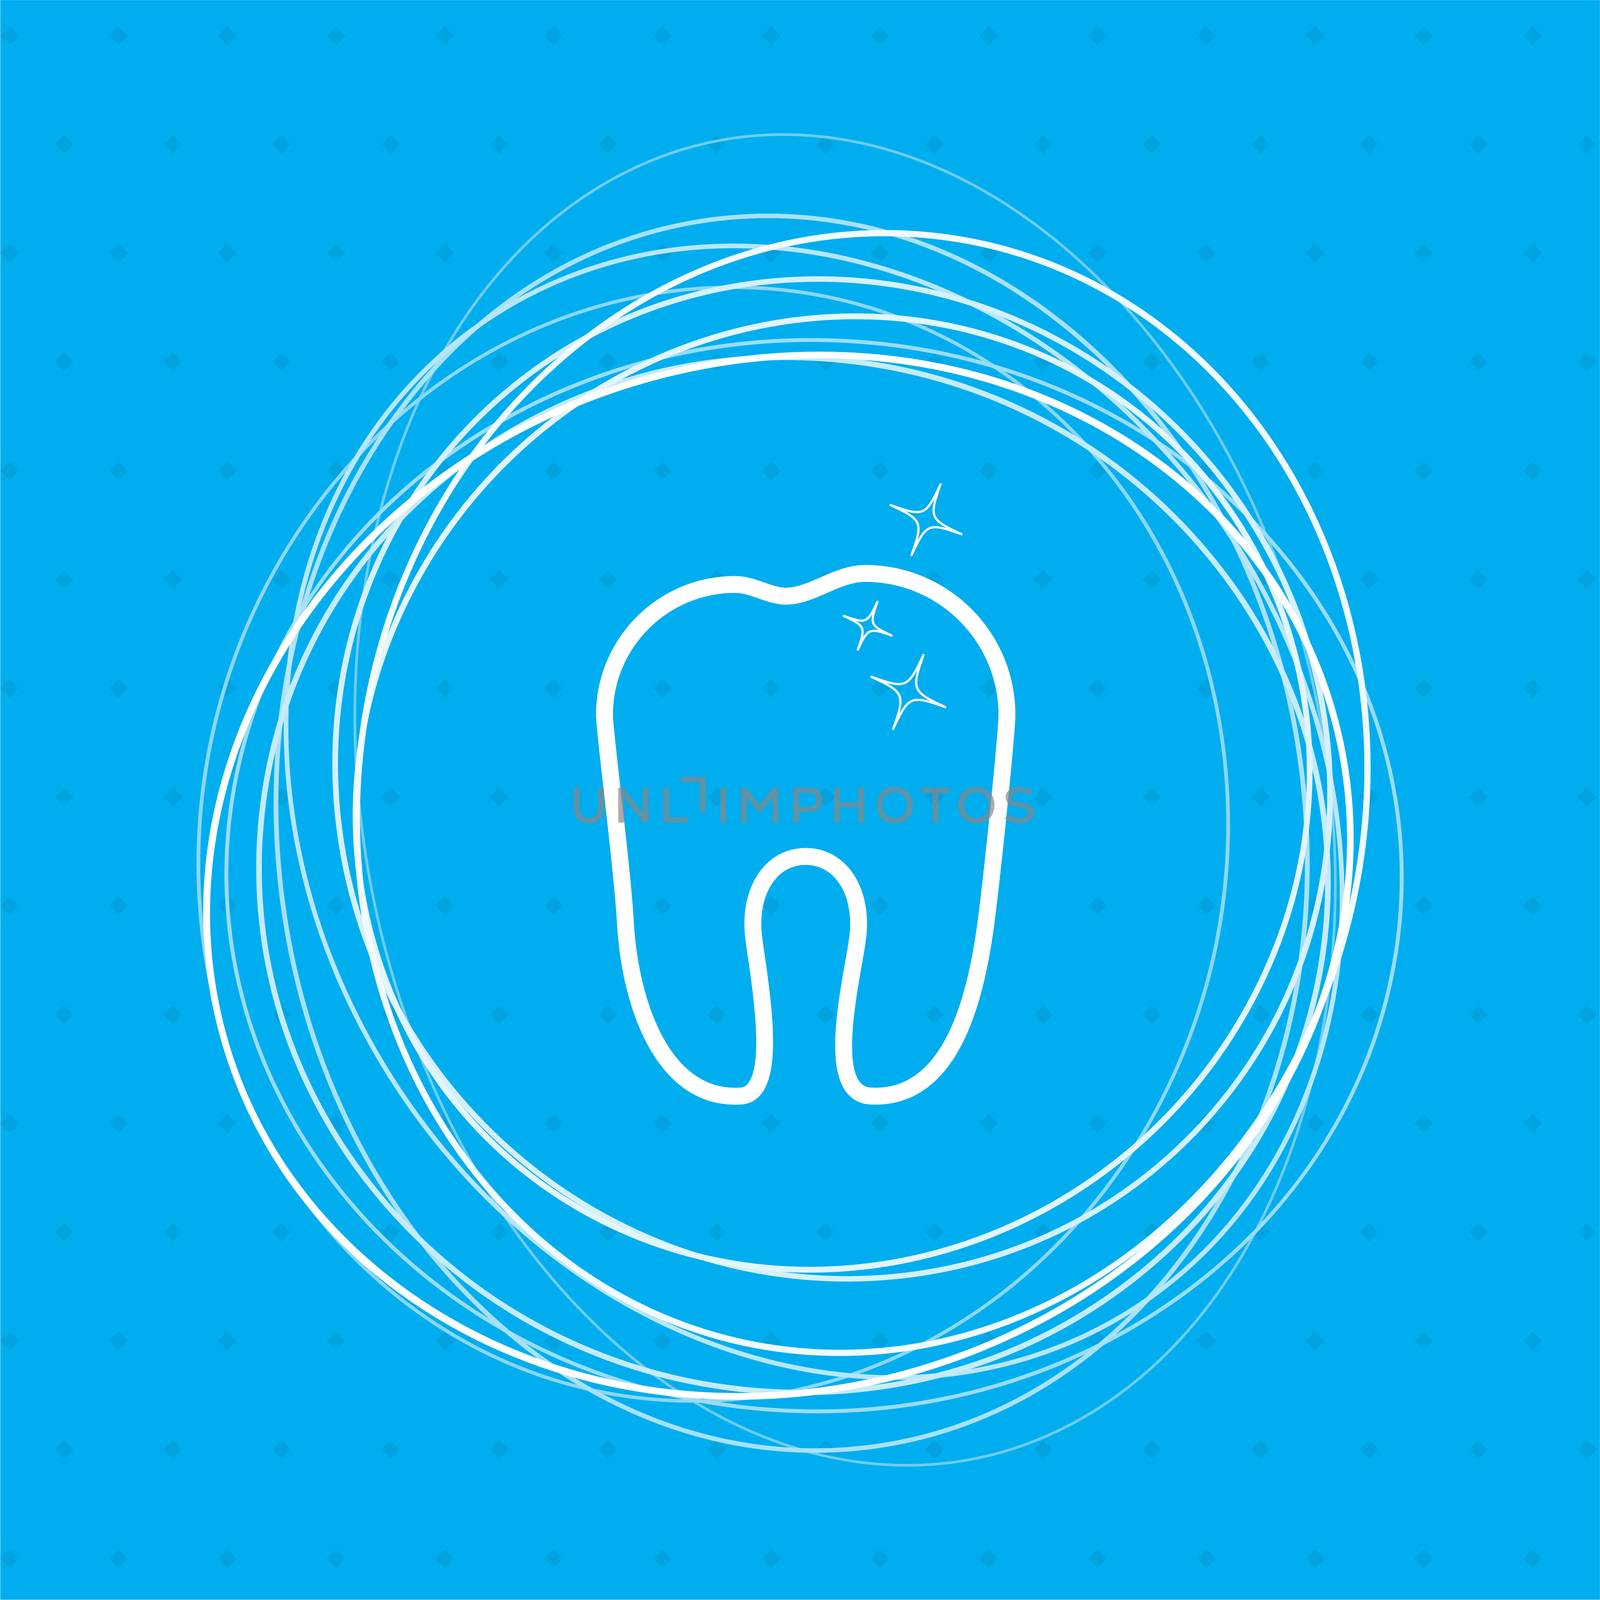 Tooth Icon on a blue background with abstract circles around and place for your text.  by Adamchuk